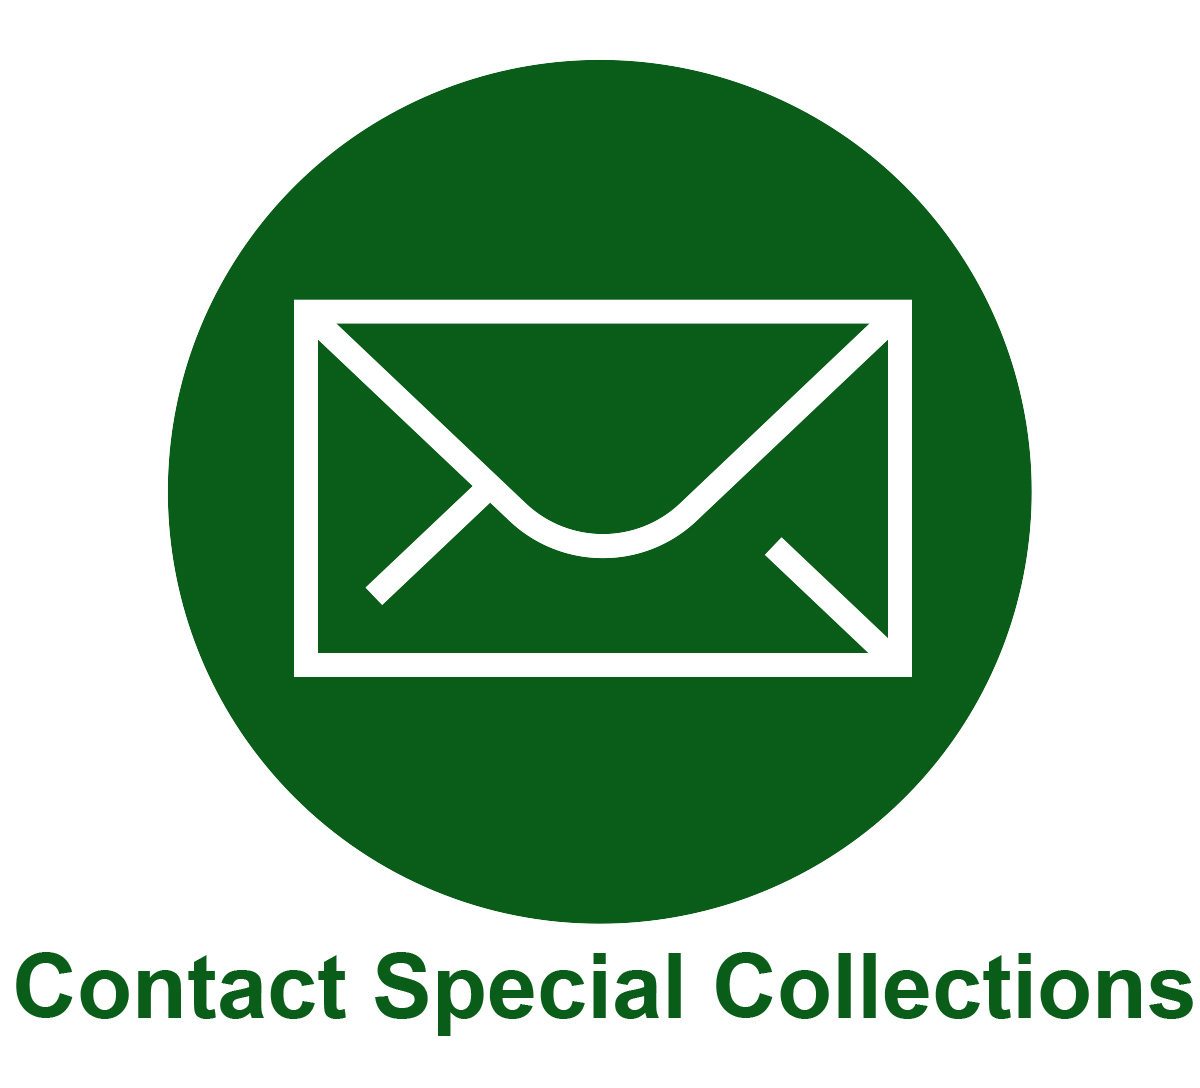 Contact Special Collections